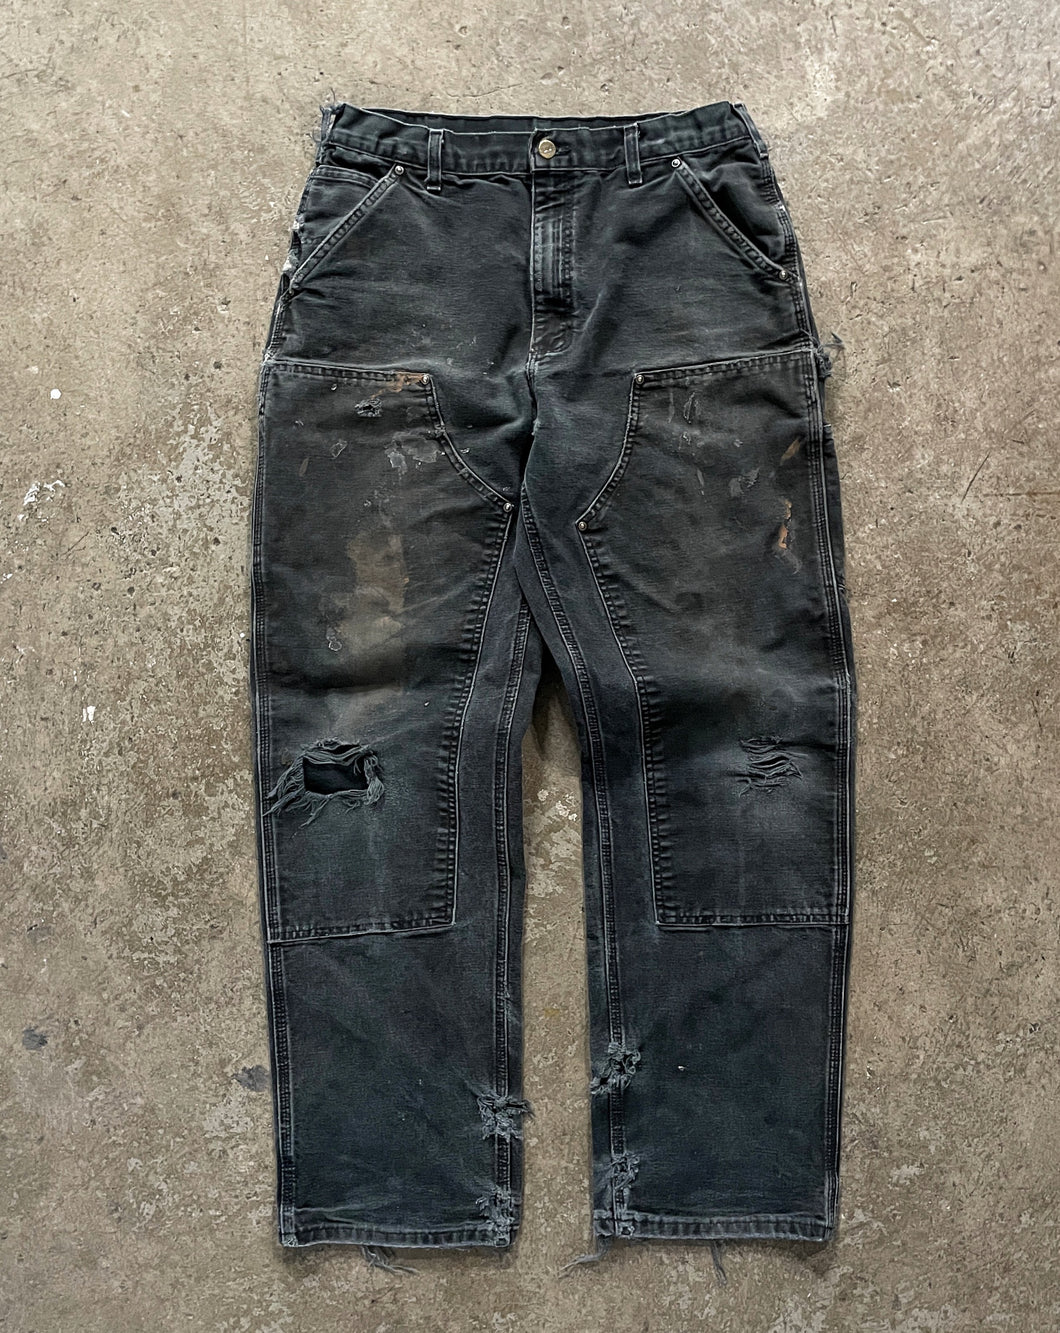 CARHARTT DISTRESSED & FADED BLACK DOUBLE KNEE WORK PANTS - 1990S